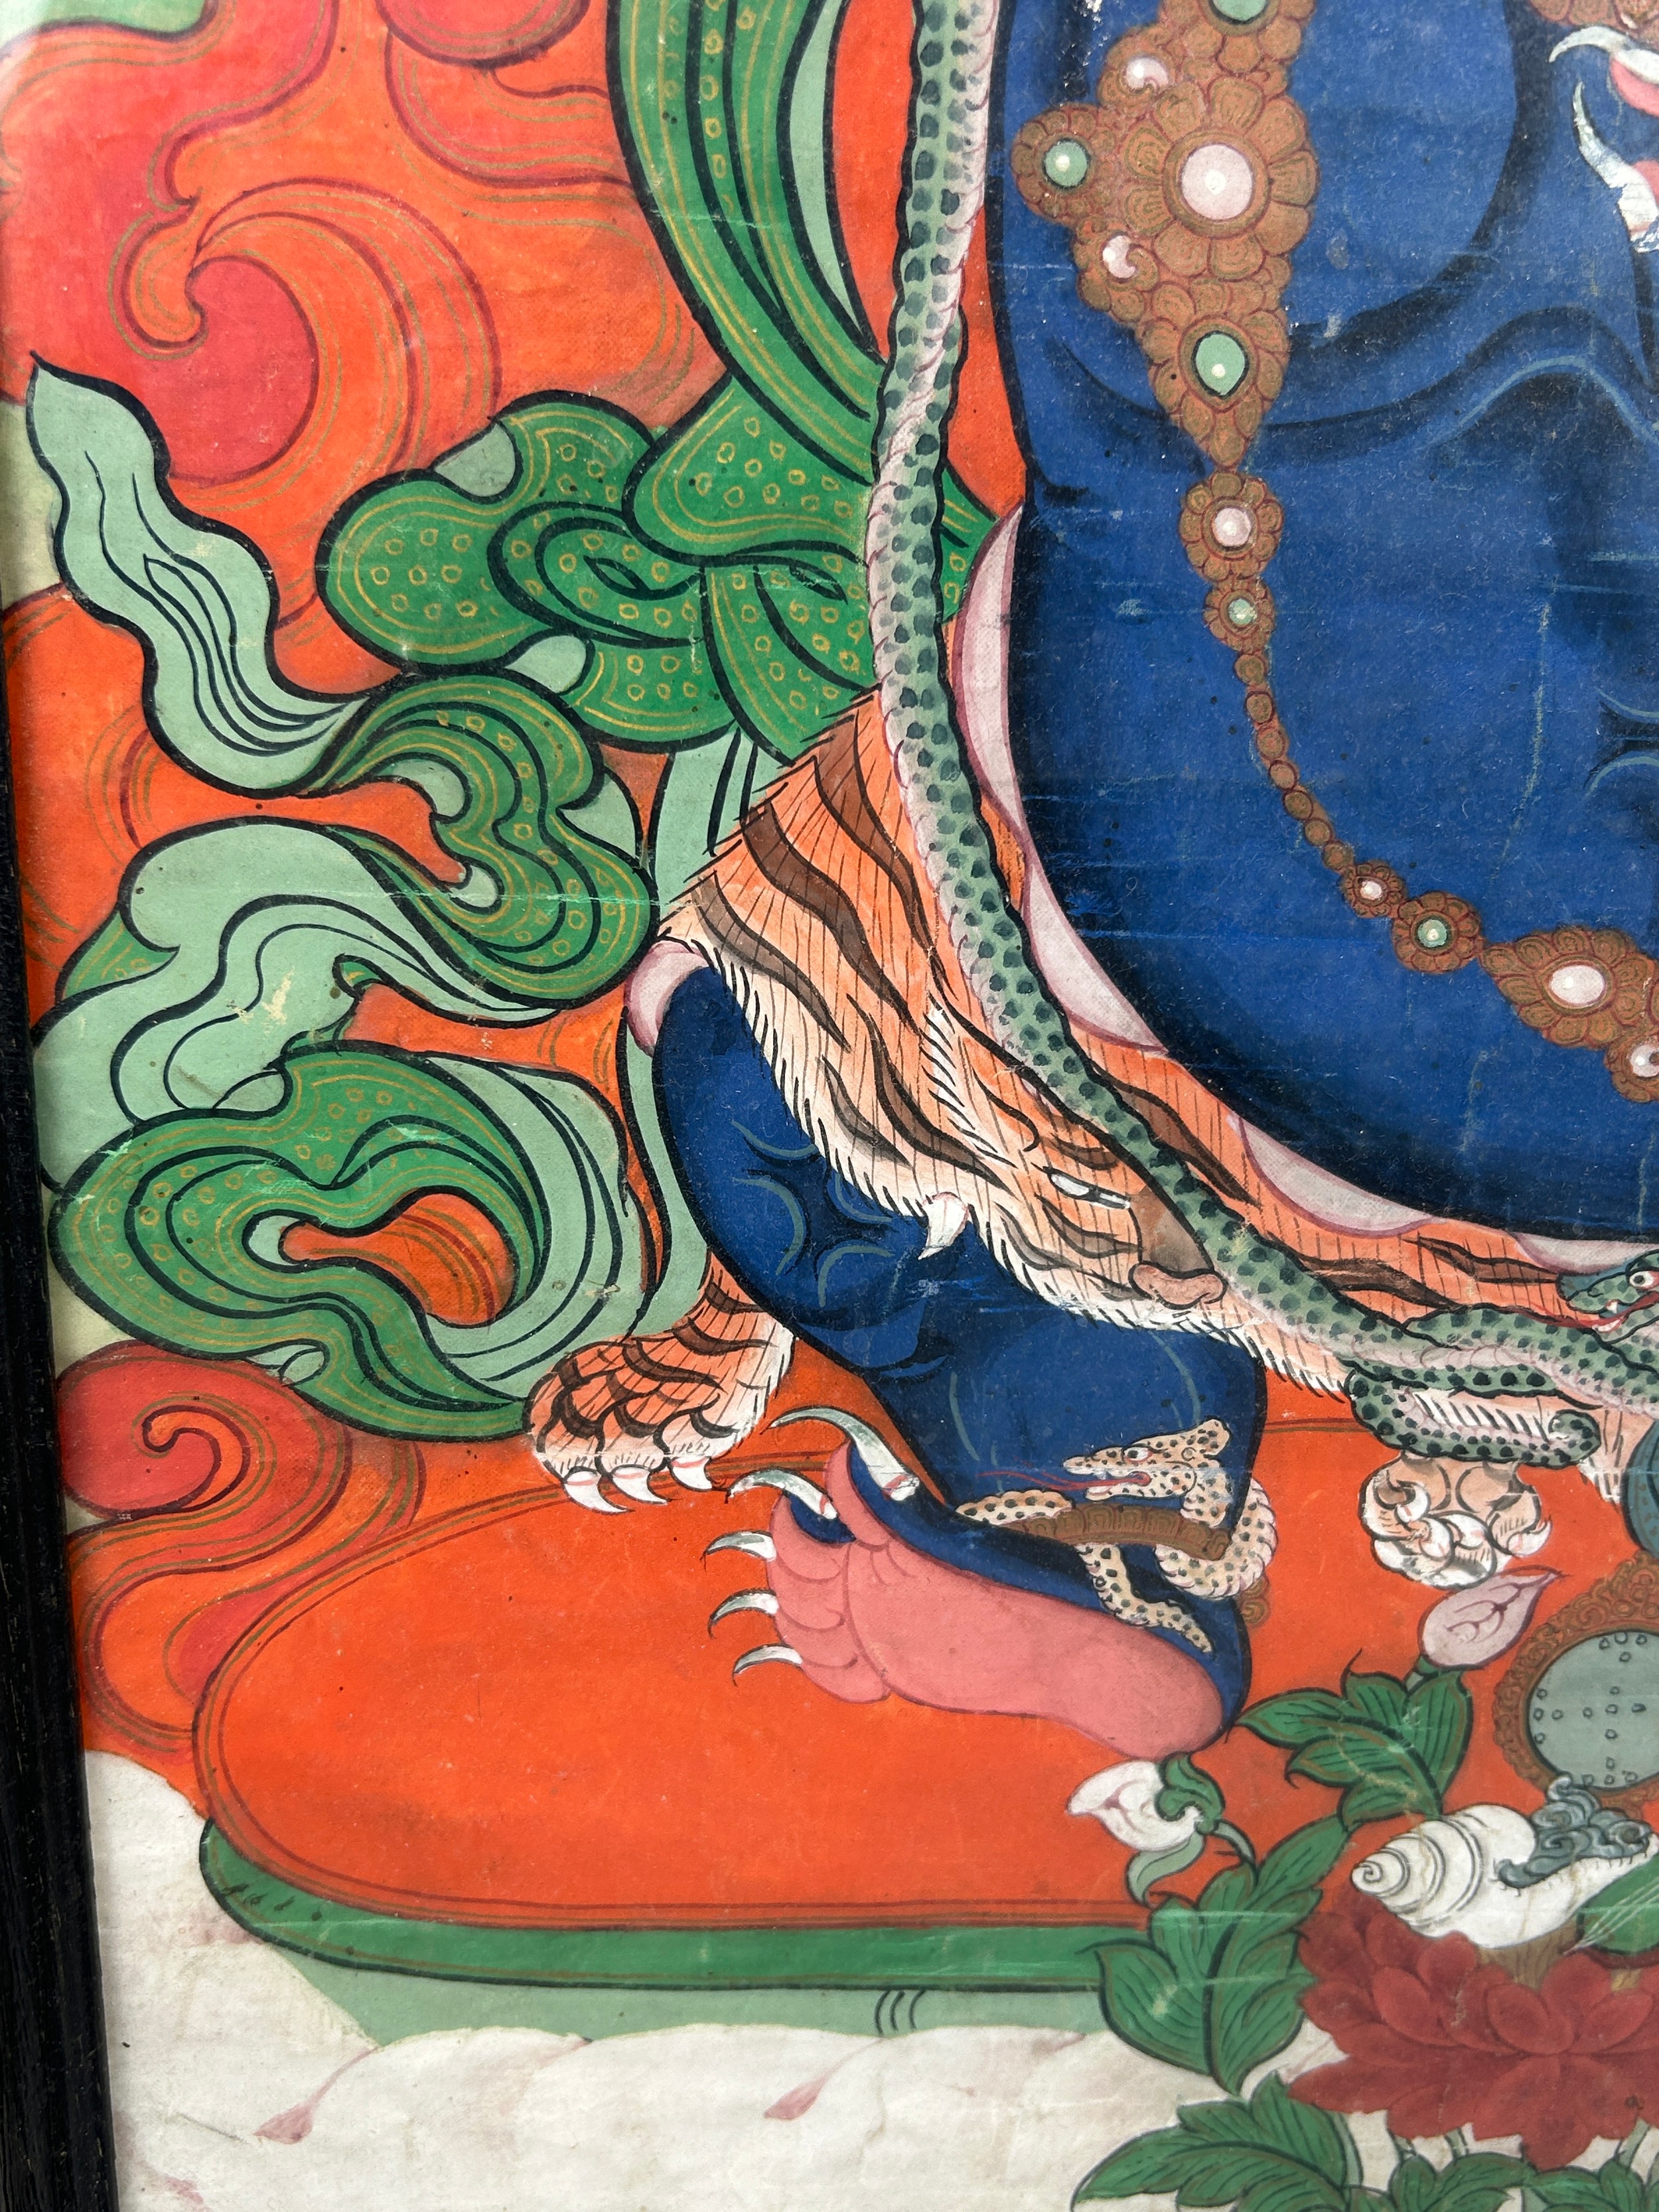 A CHINESE 19TH CENTURY THANGKA DEPICTING THE BODHSATTVA VAJRAPANI FROM TIBET, 60cm x 40cm - Image 5 of 10